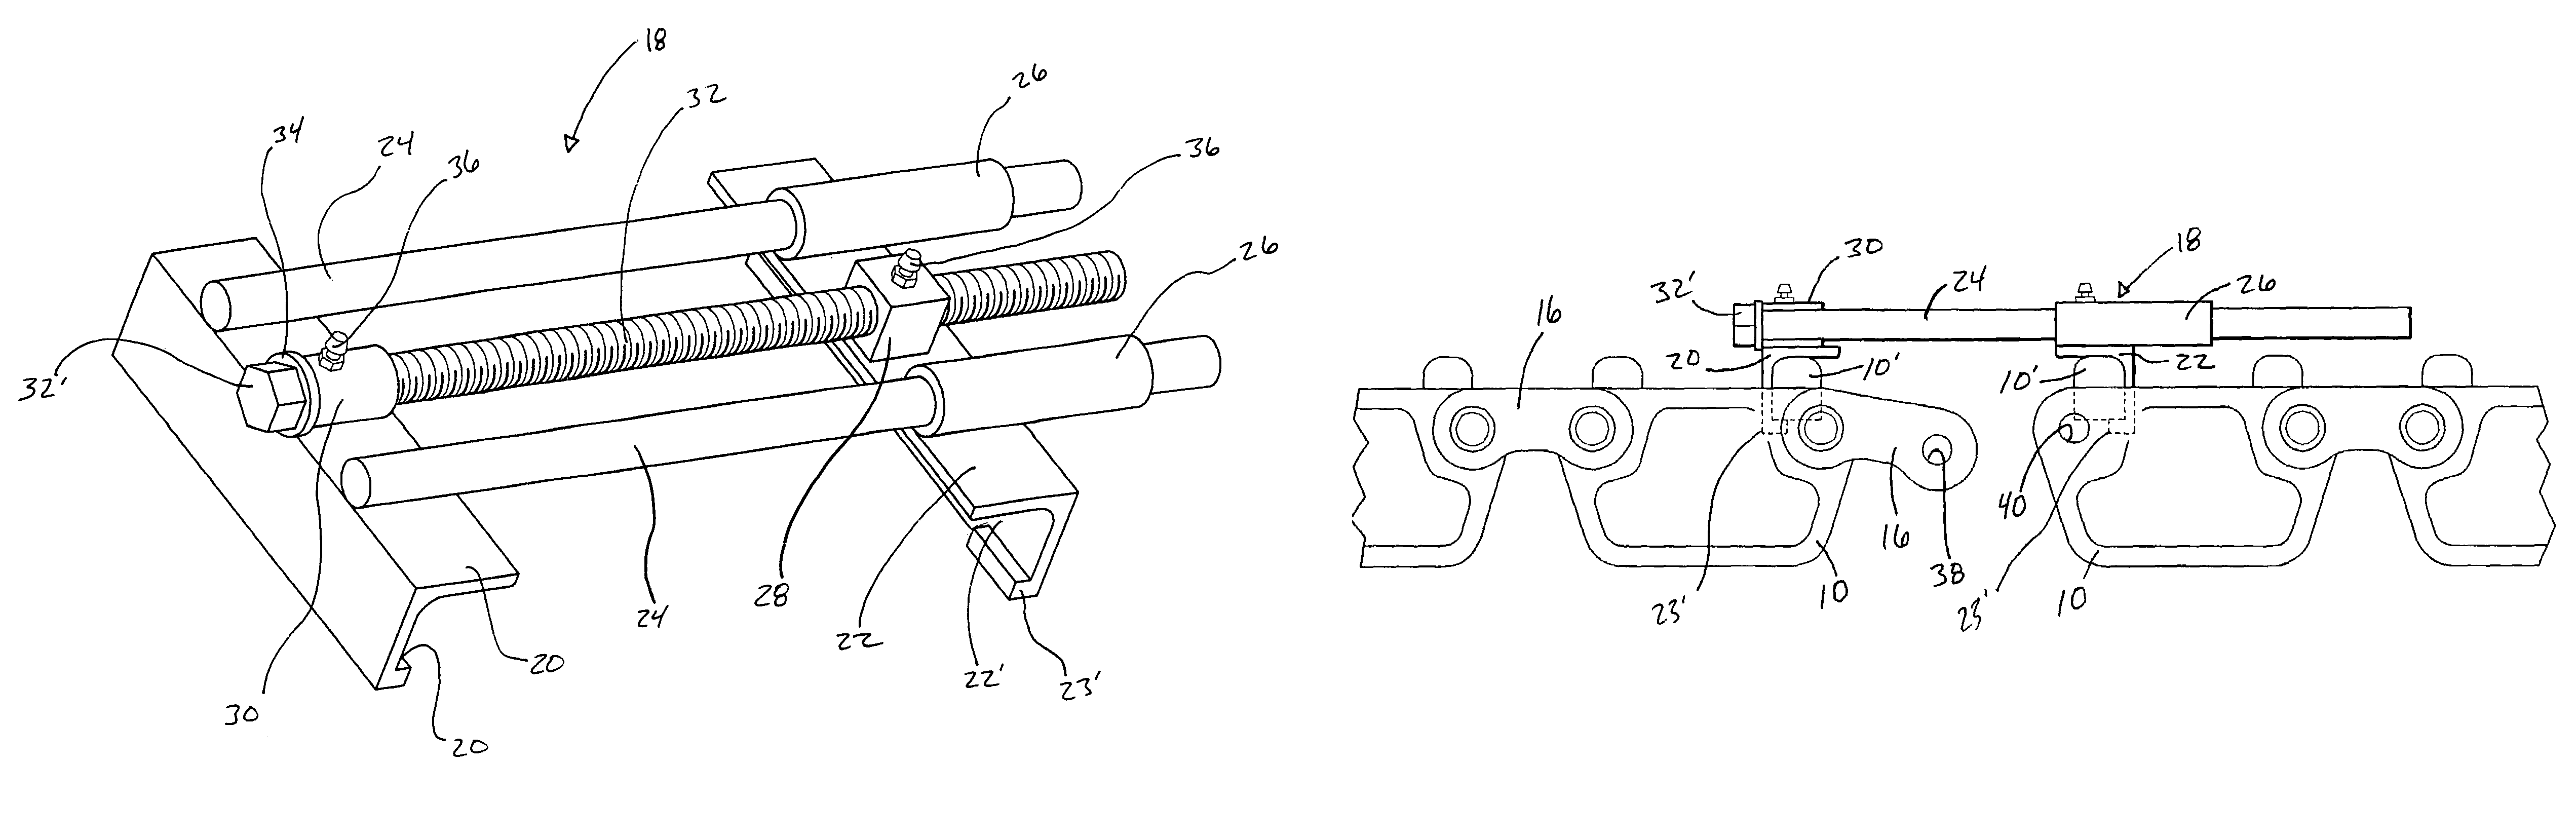 Method and apparatus for installing and tensioning track assemblies on skid steer loaders